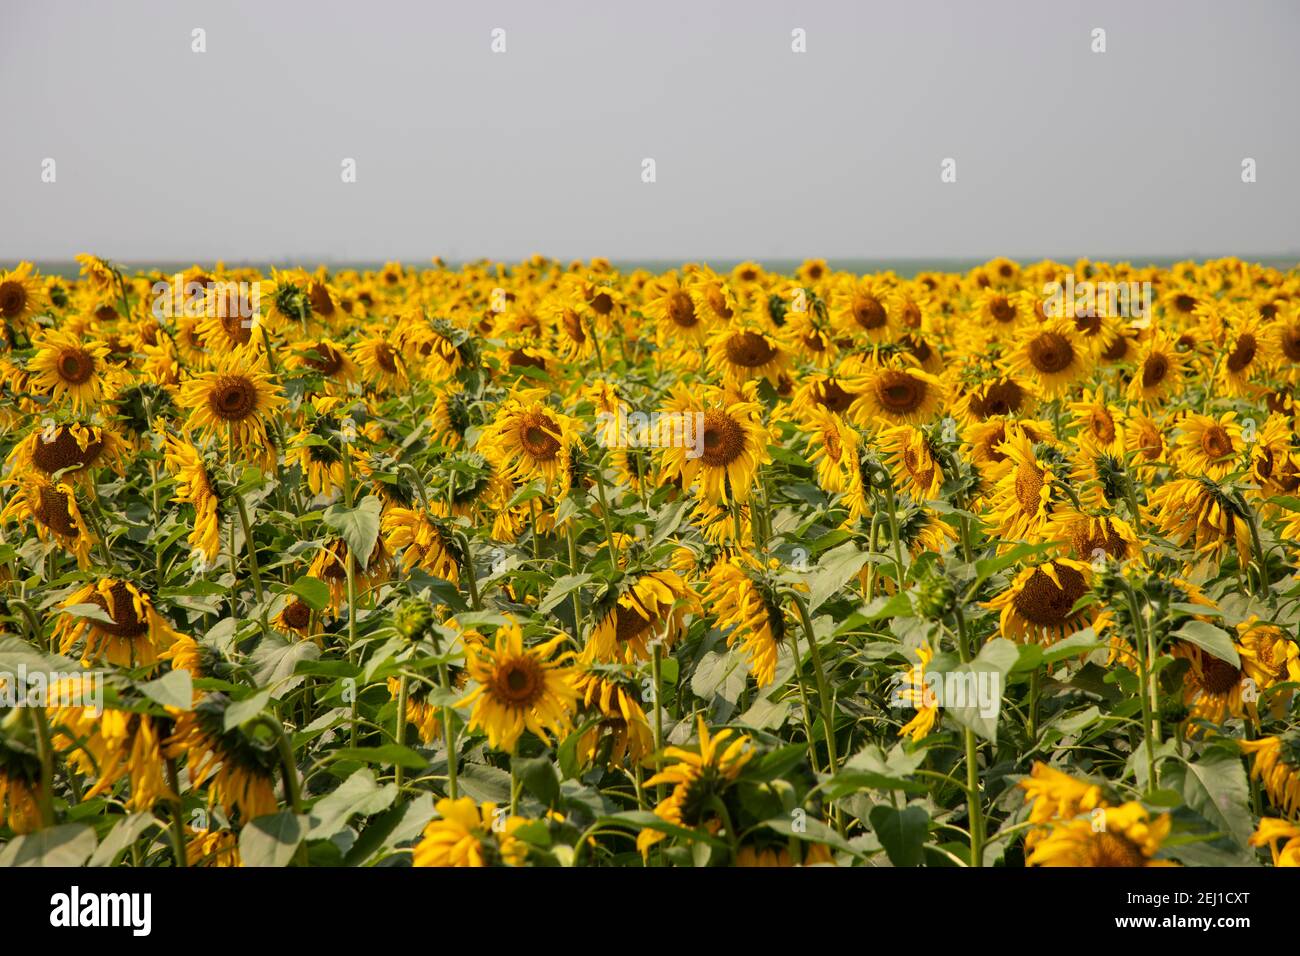 Sunflowers in the field. Stock Photo